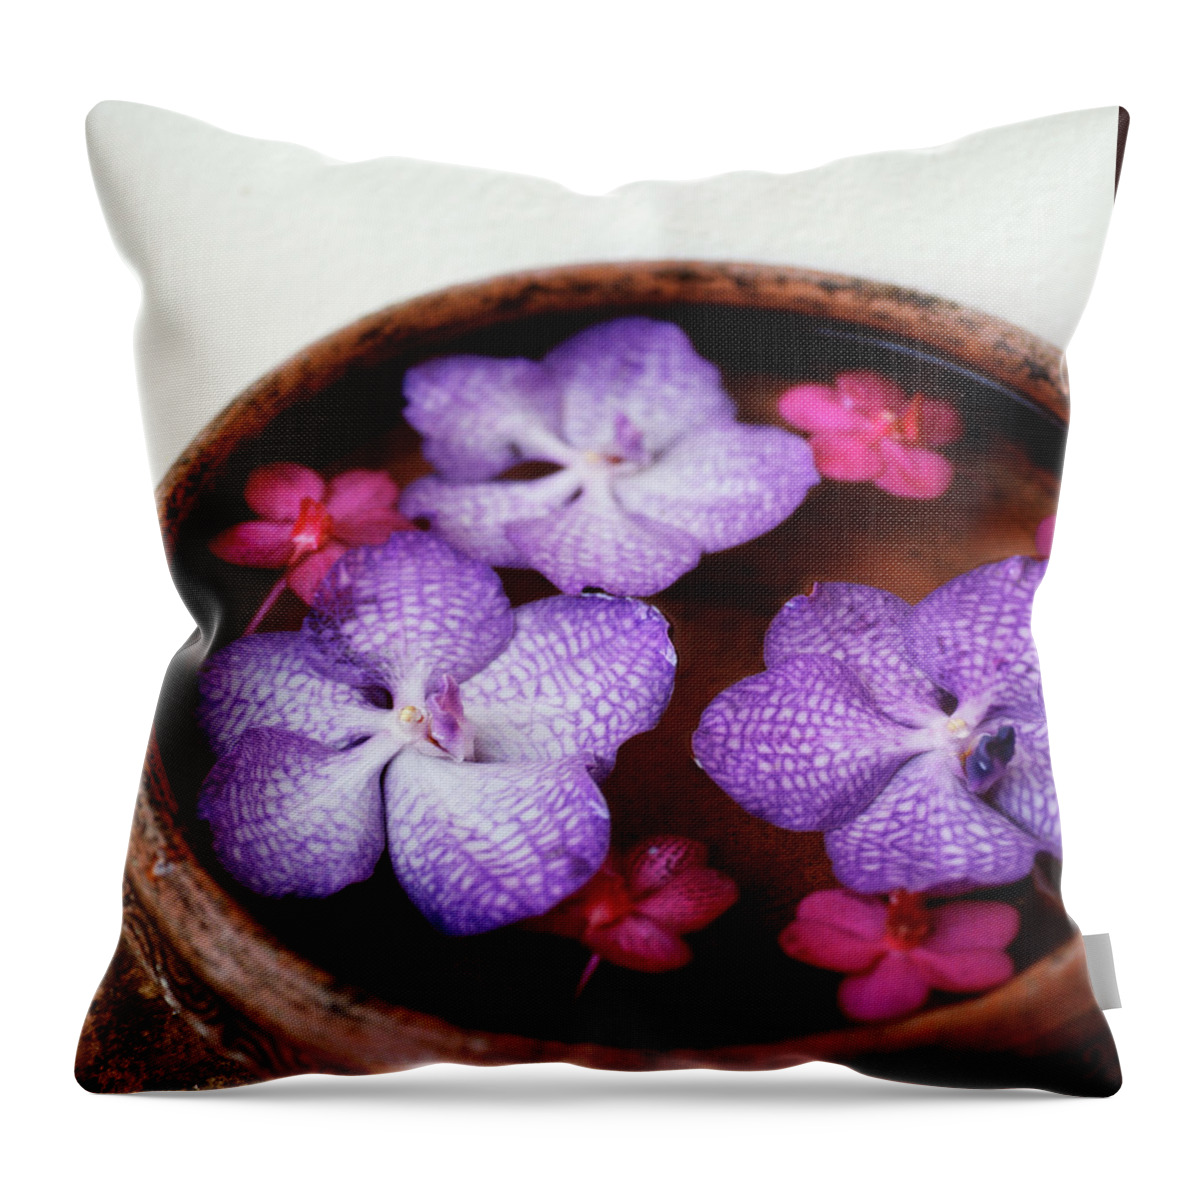 Purple Throw Pillow featuring the photograph Purple Flowers by Cristina Pedrazzini